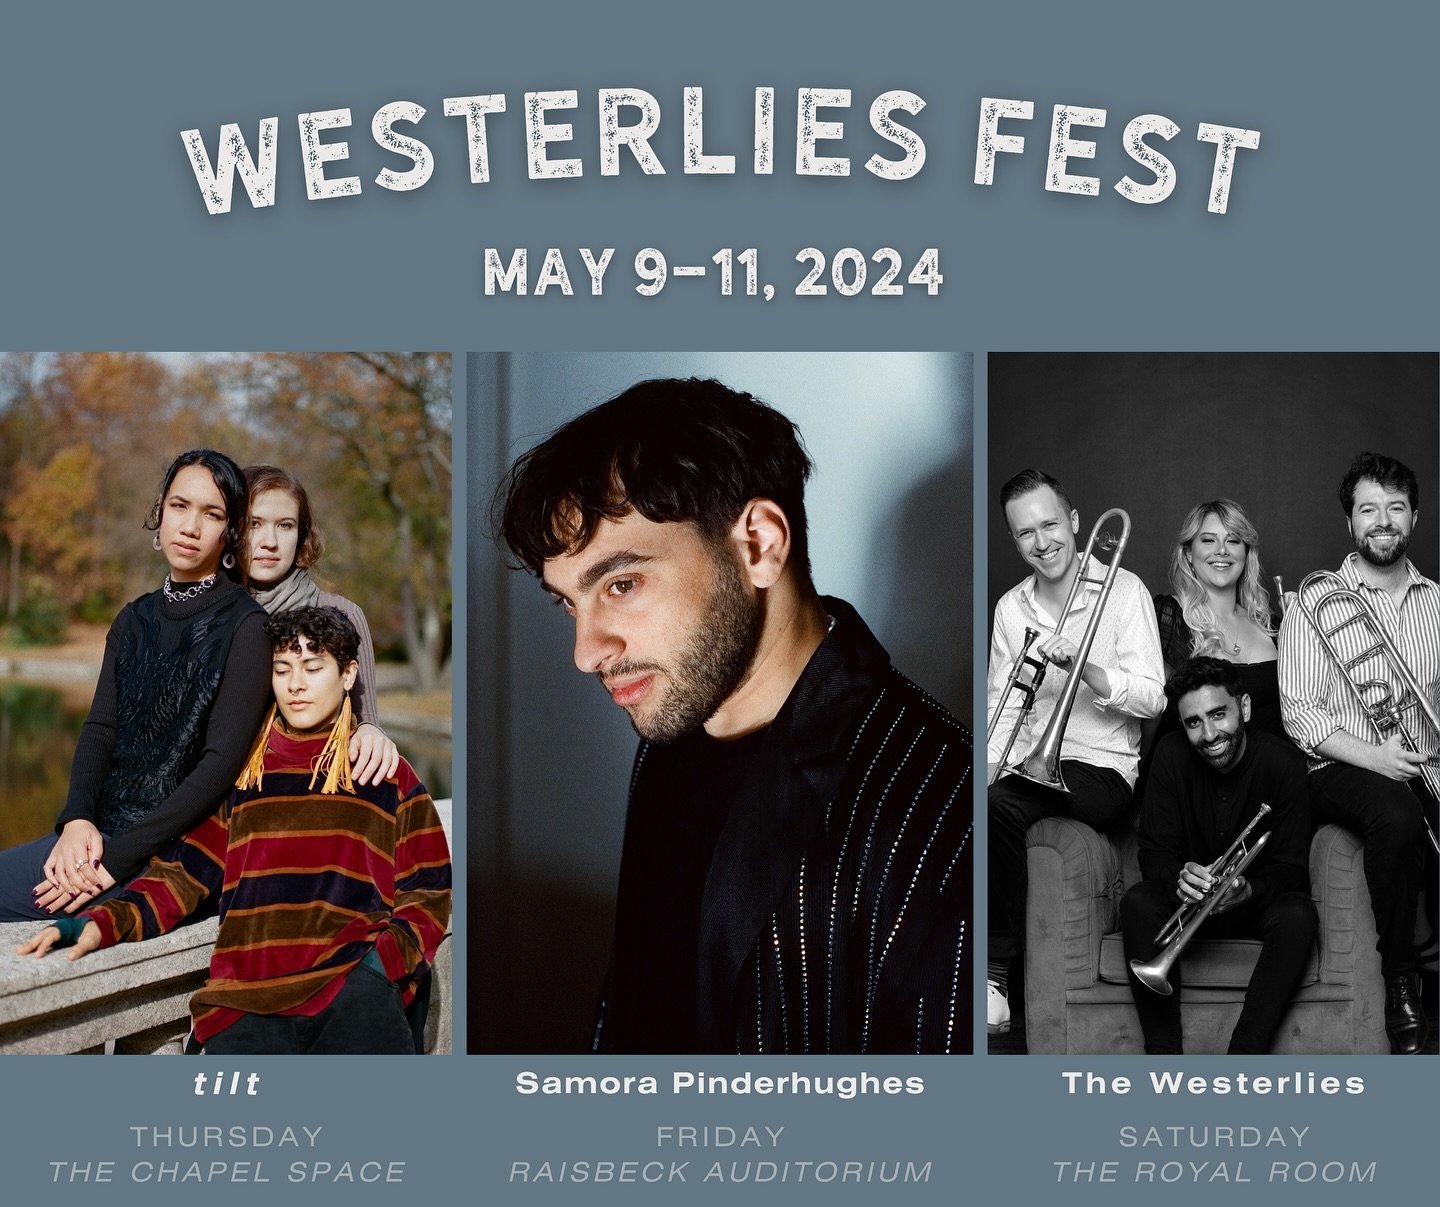 Next week we come home to Seattle for our sixth annual Westerlies Fest! Three nights of music featuring dream collaborators @samorapinderhughes and @tiltsounds. Say hey in the comments if you&rsquo;re coming!

#westerliesfest #thewesterlies
📷: Alex 